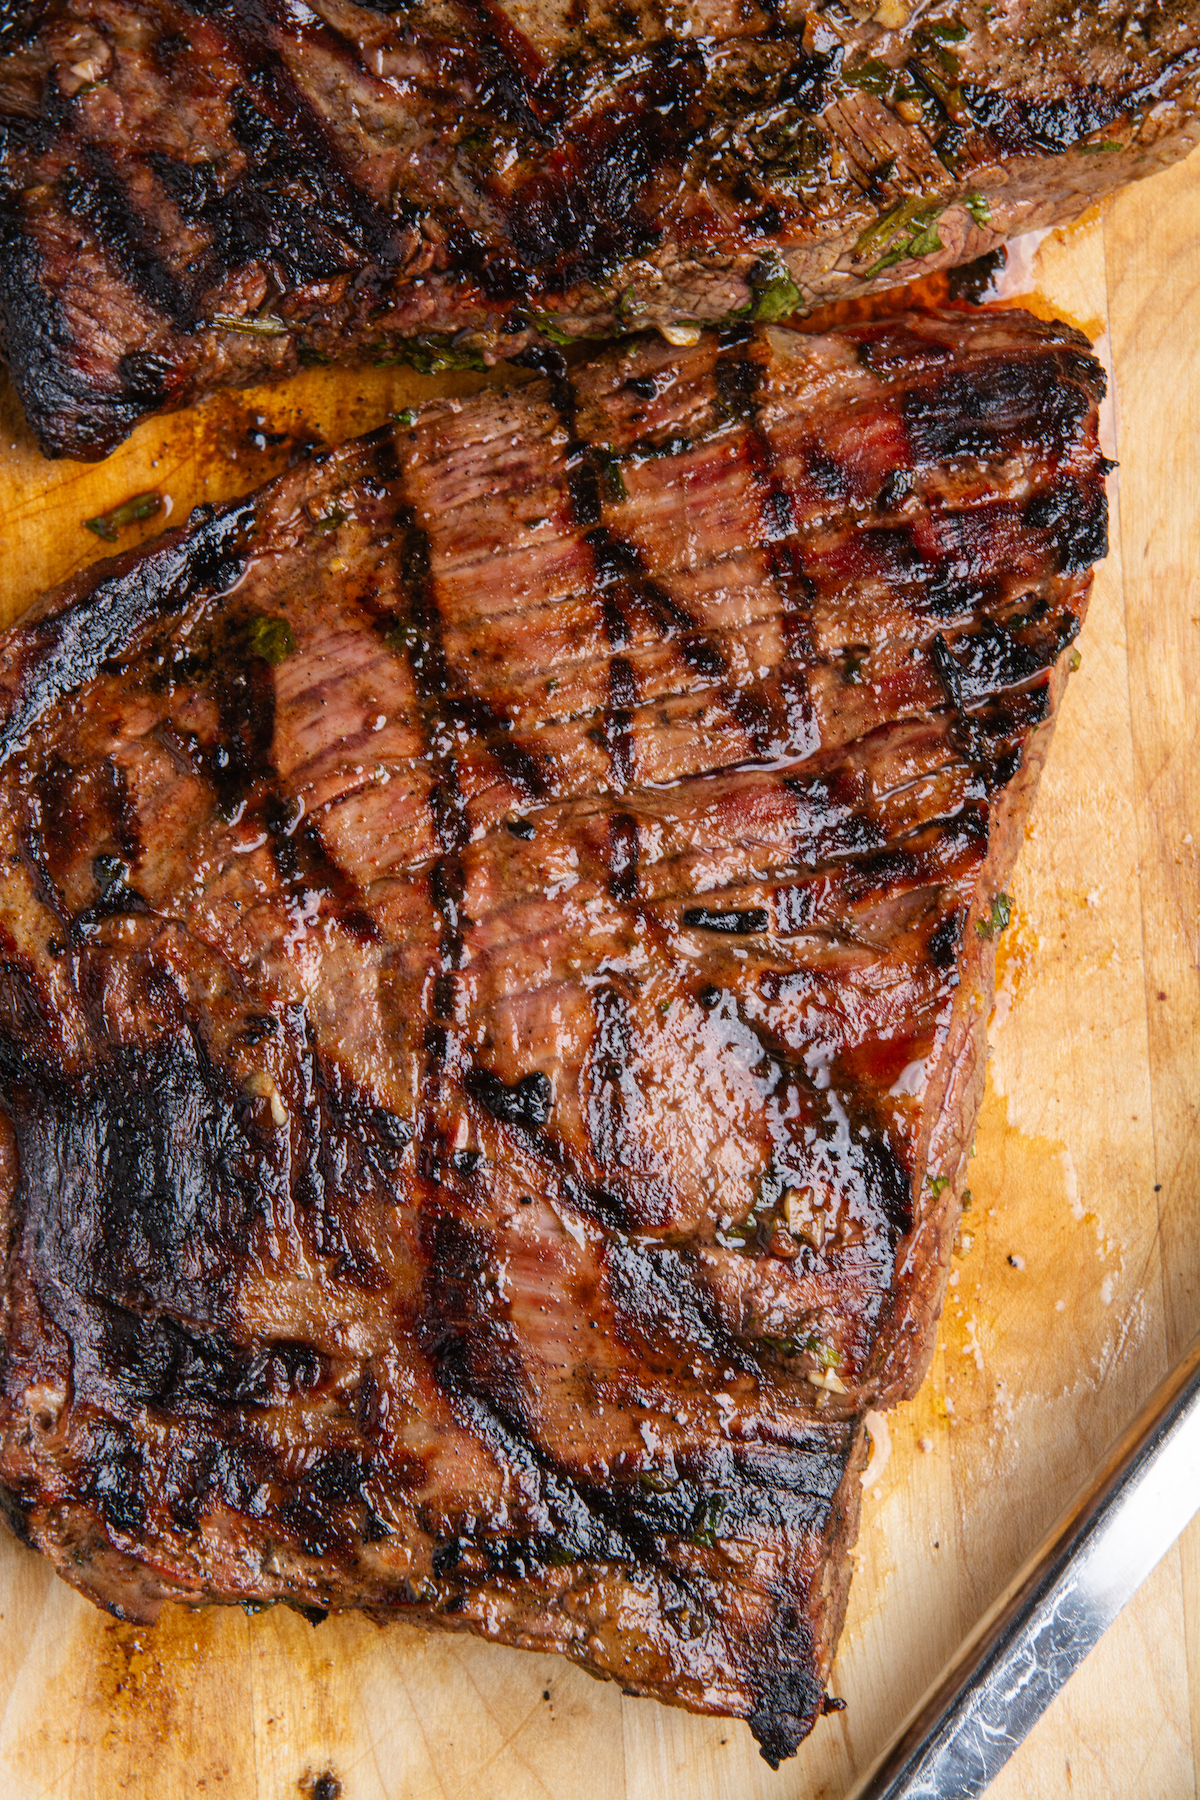 A large portion of grilled flank steak or carne asada resting on a wooden cutting board.